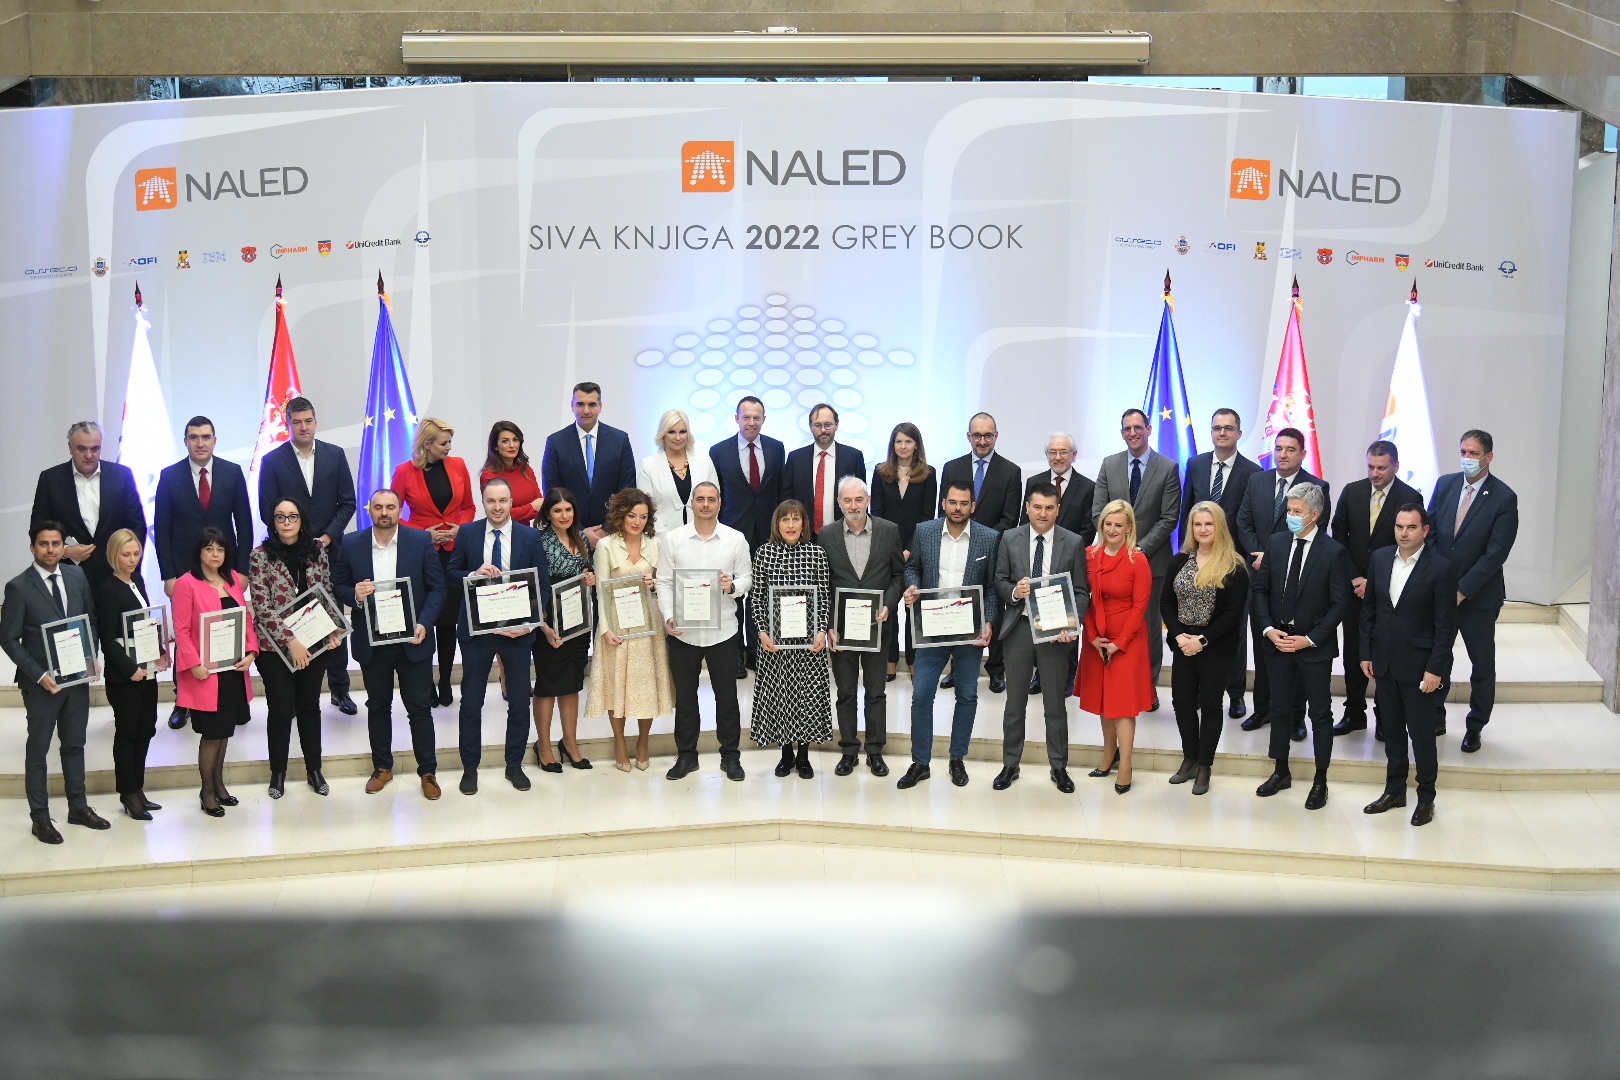 NALED has presented the new edition of the Grey Book